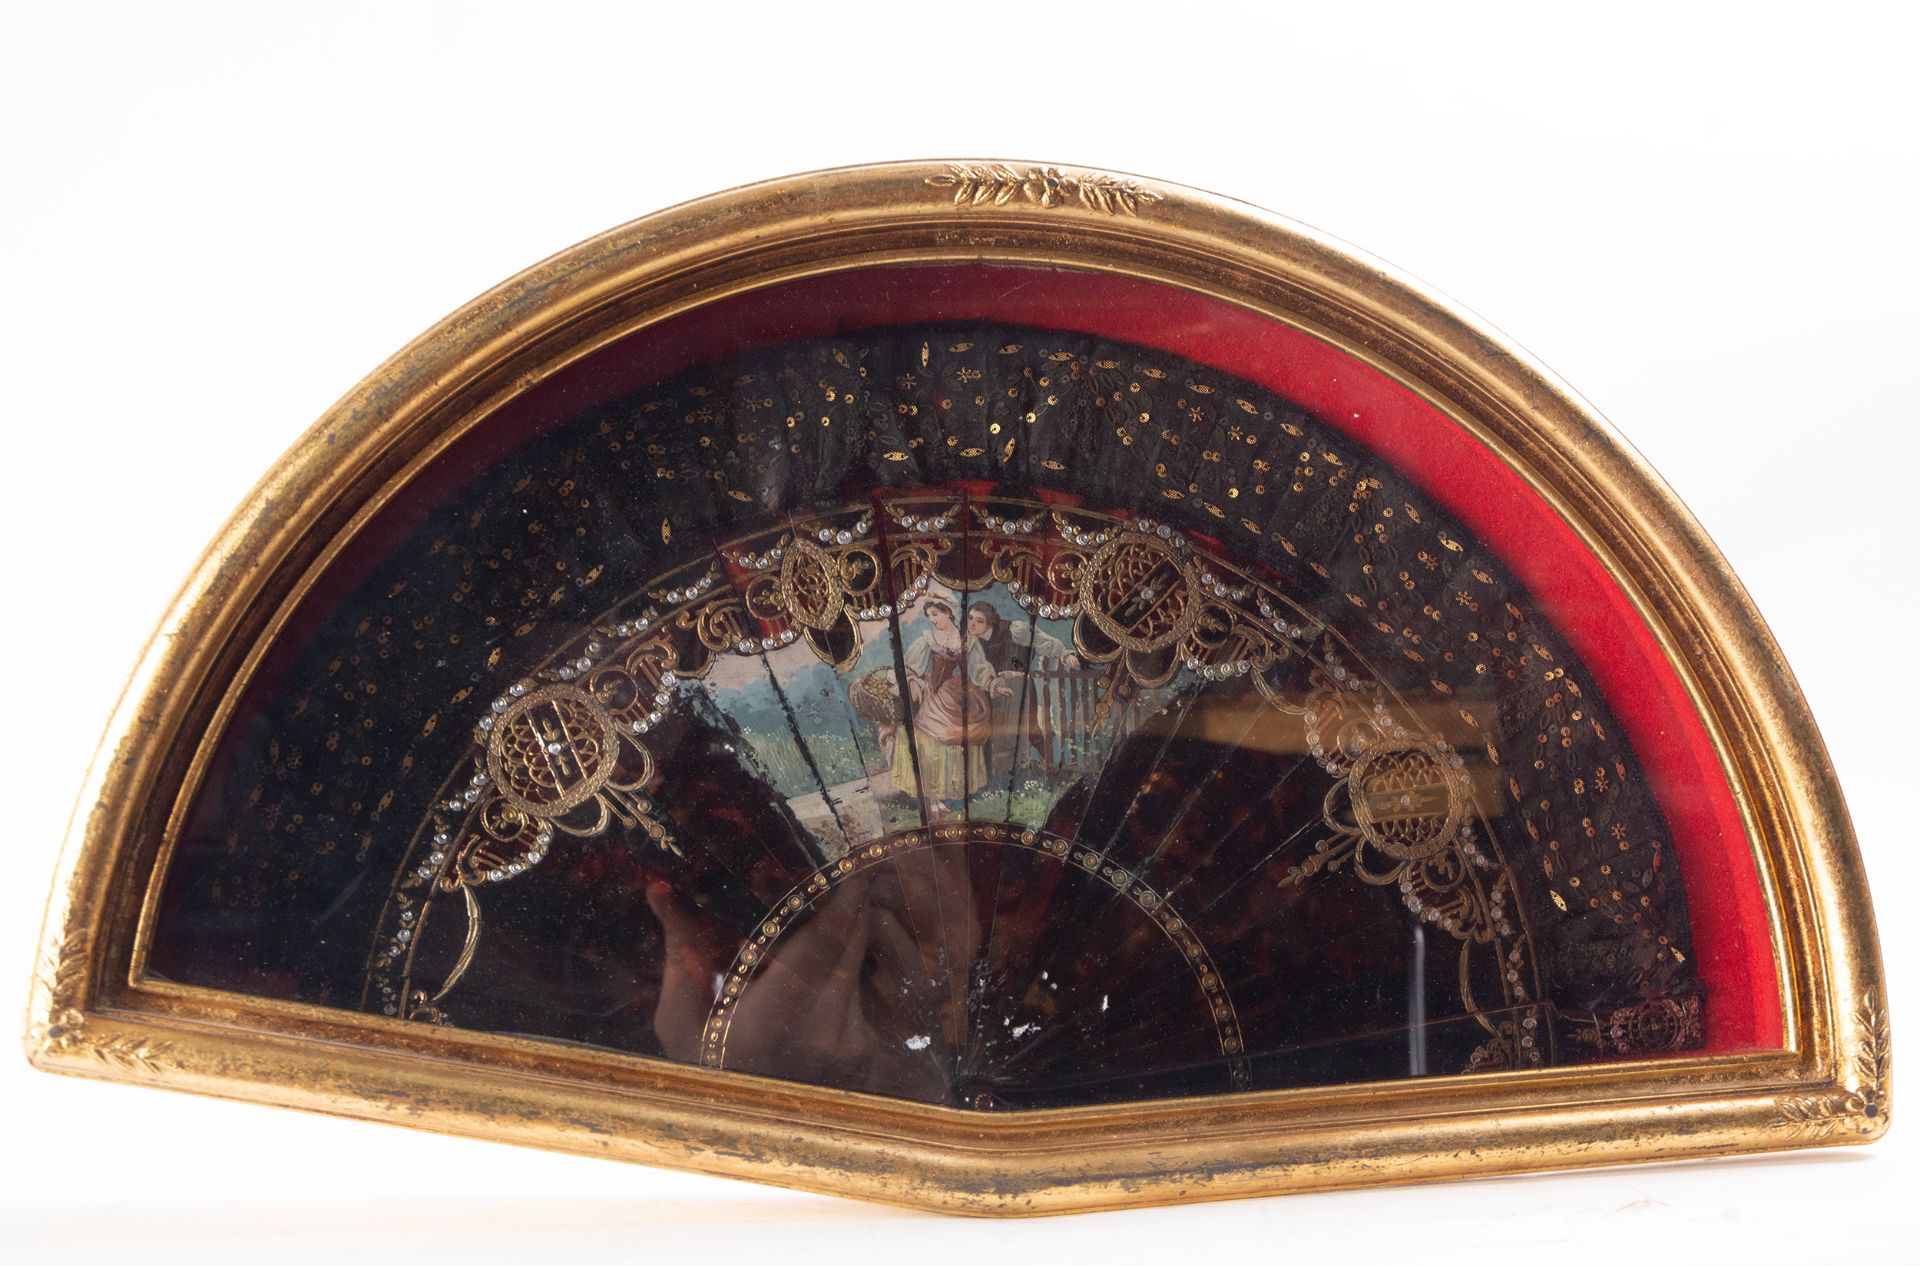 Fan in Tortoiseshell and Gold and Silver filigree depicting a Gallant Scene, 19th century